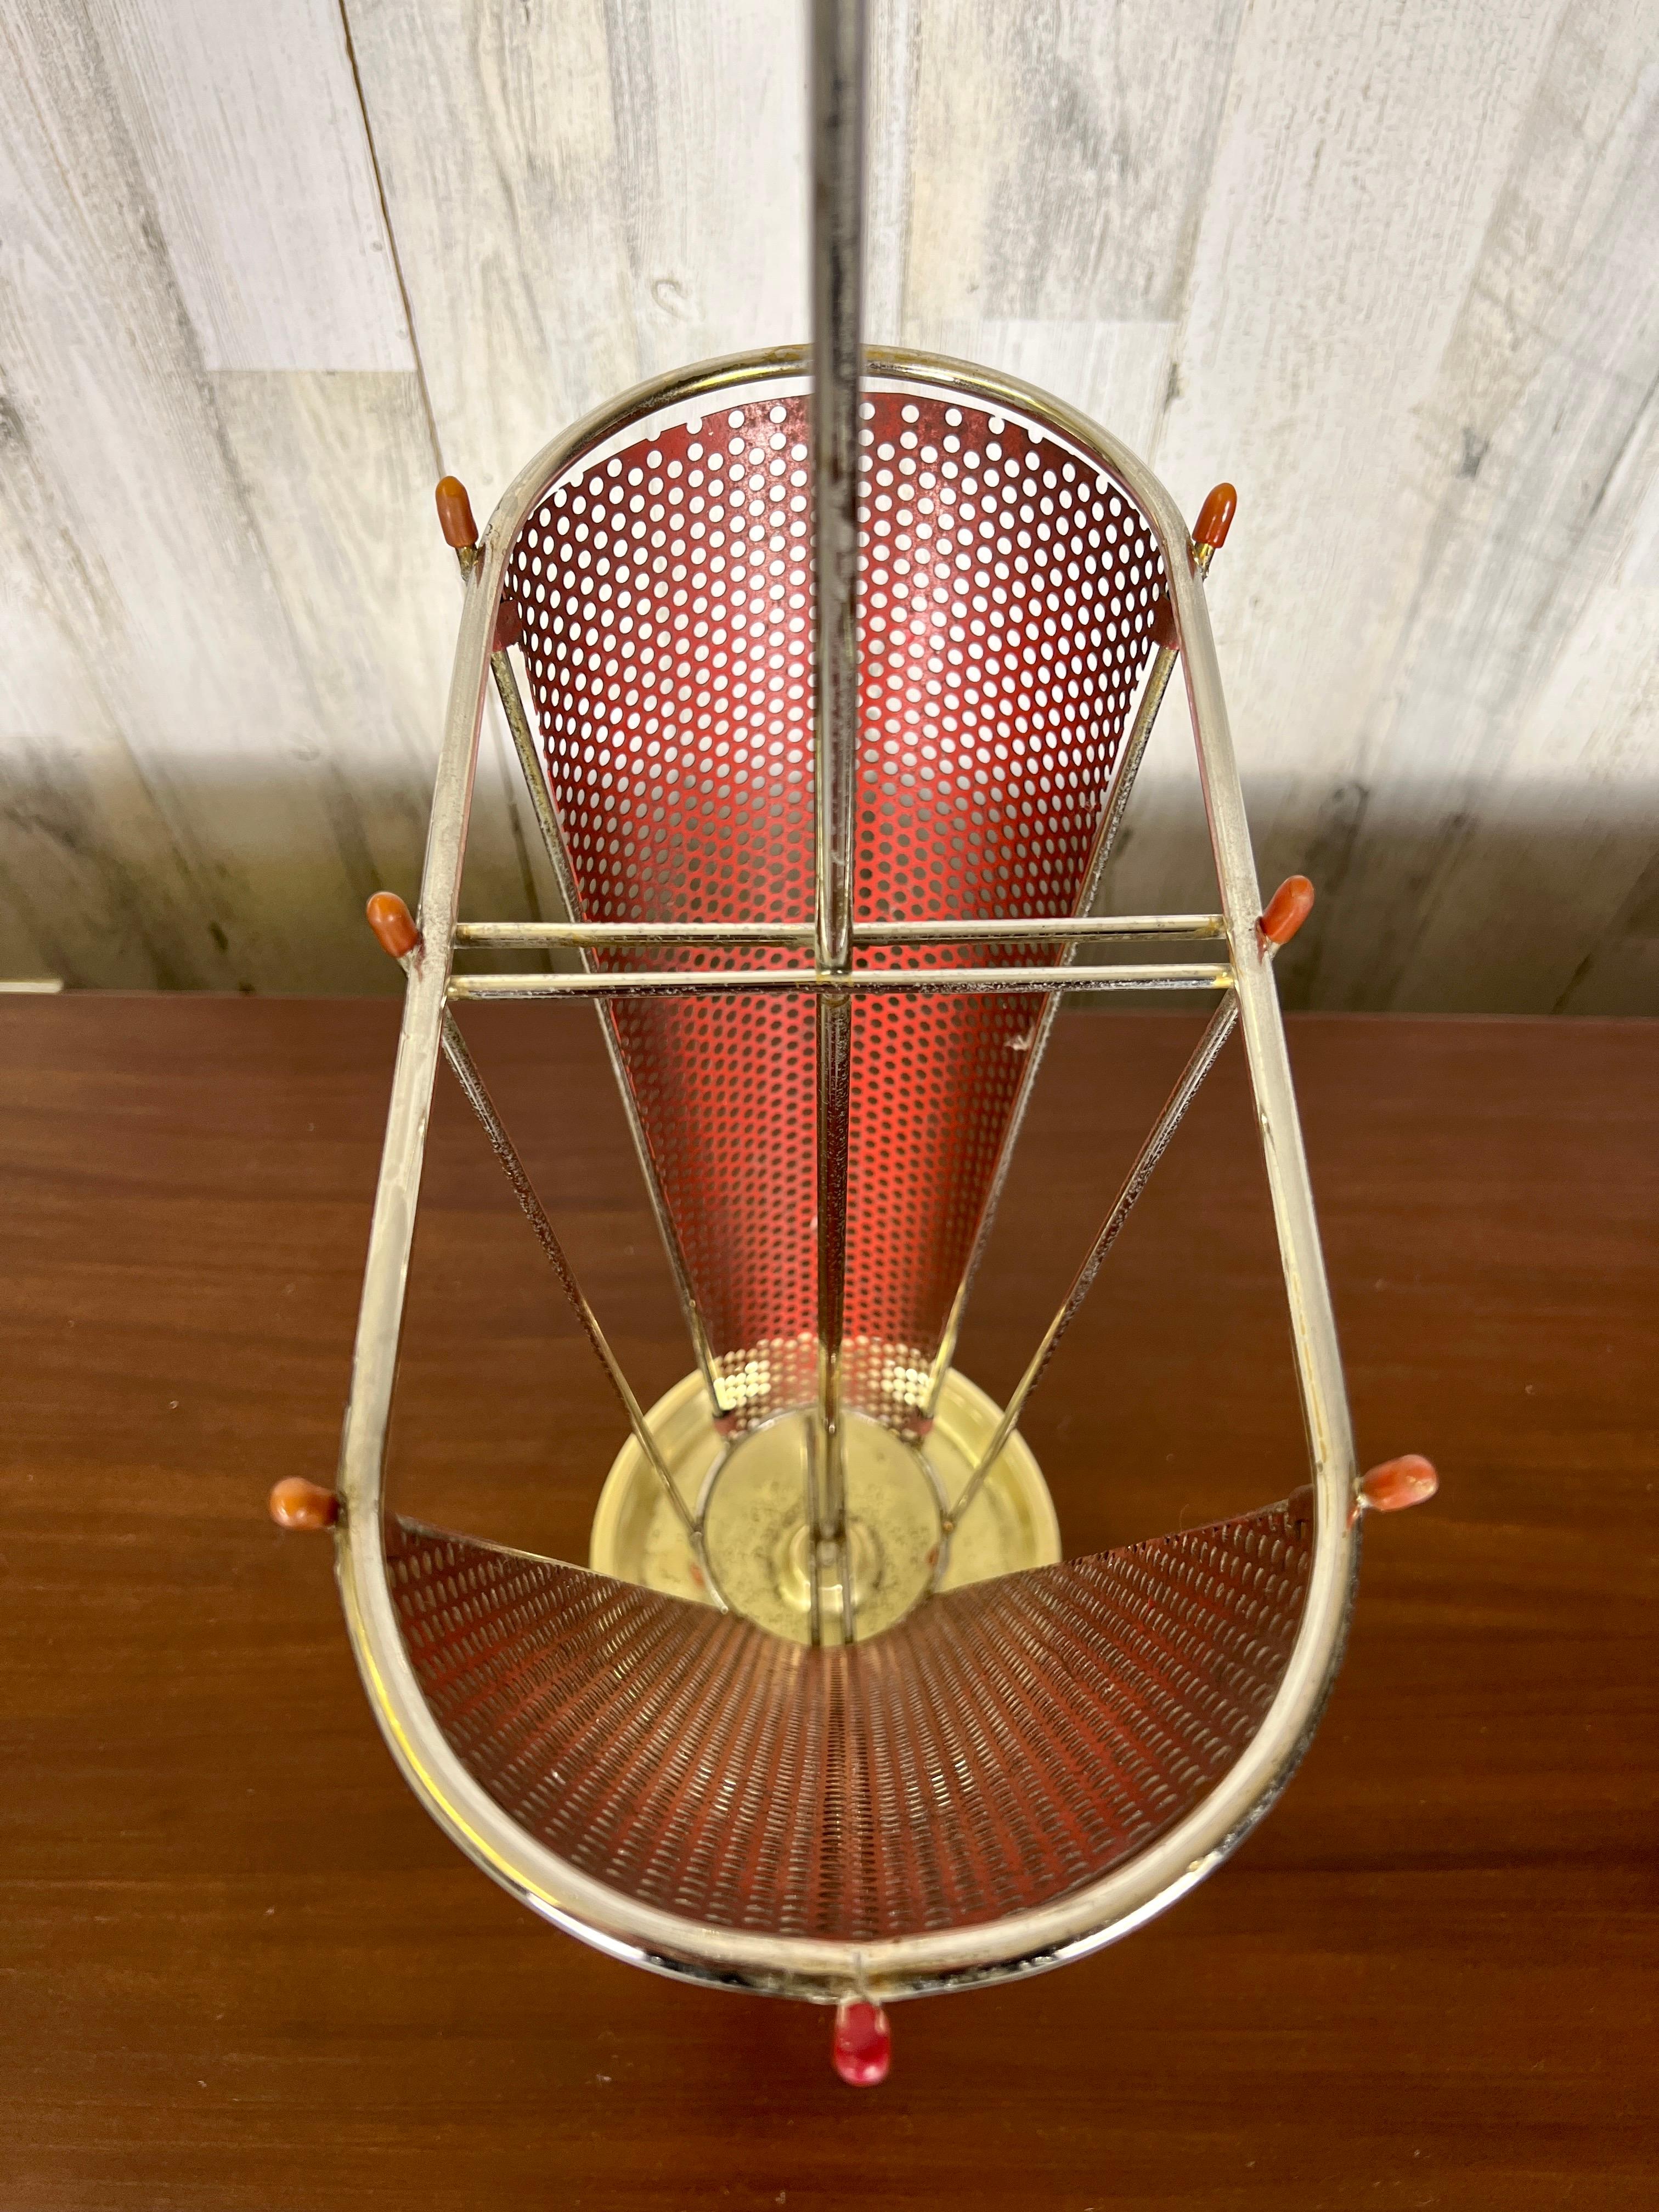 20th Century Perforated Metal Umbrella Stand Attributed to Mathieu Mategot For Sale